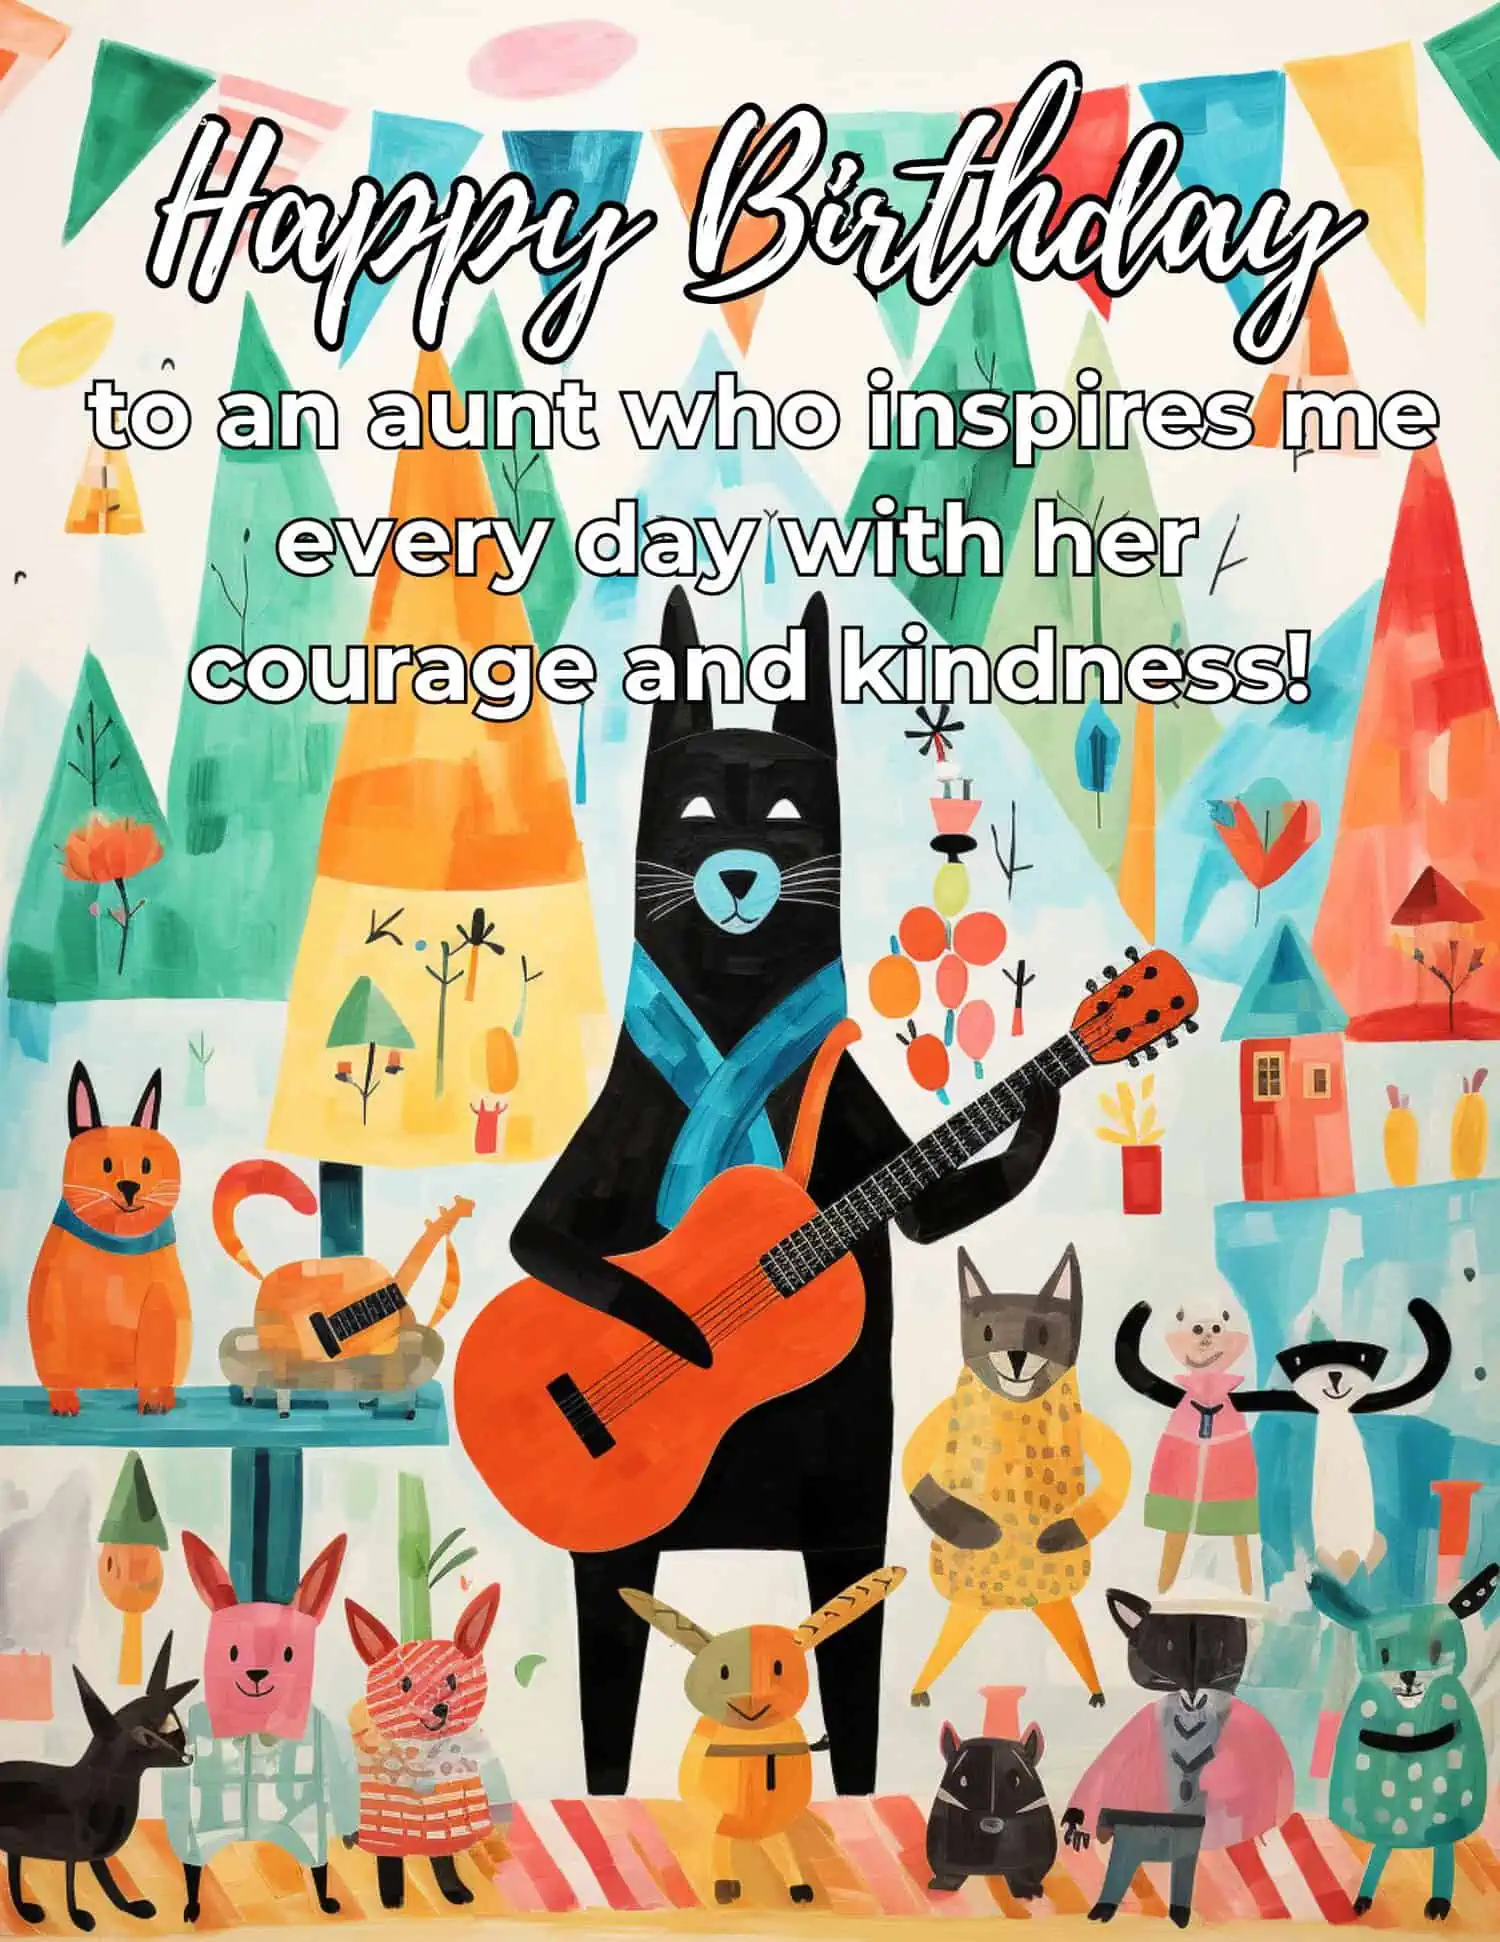 A collection of uplifting and motivational birthday wishes for aunts, designed to honor their inspiring presence and the unique impact they have on our lives.